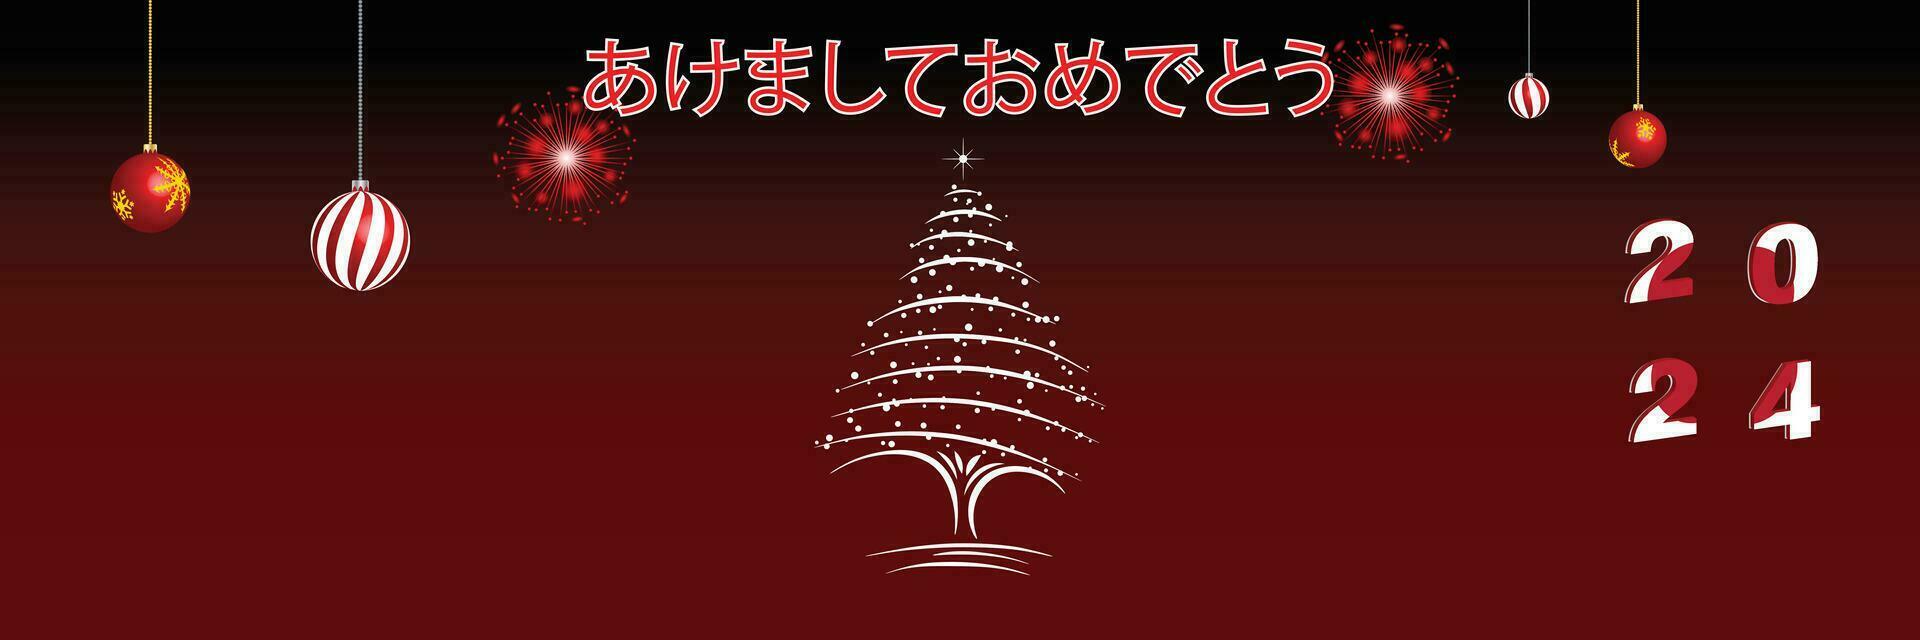 Merry Christmas and Happy New Year web page cover. Japan flag on the year 2024. Holiday design for greeting card, banner, celebration poster, party invitation. Vector illustration.